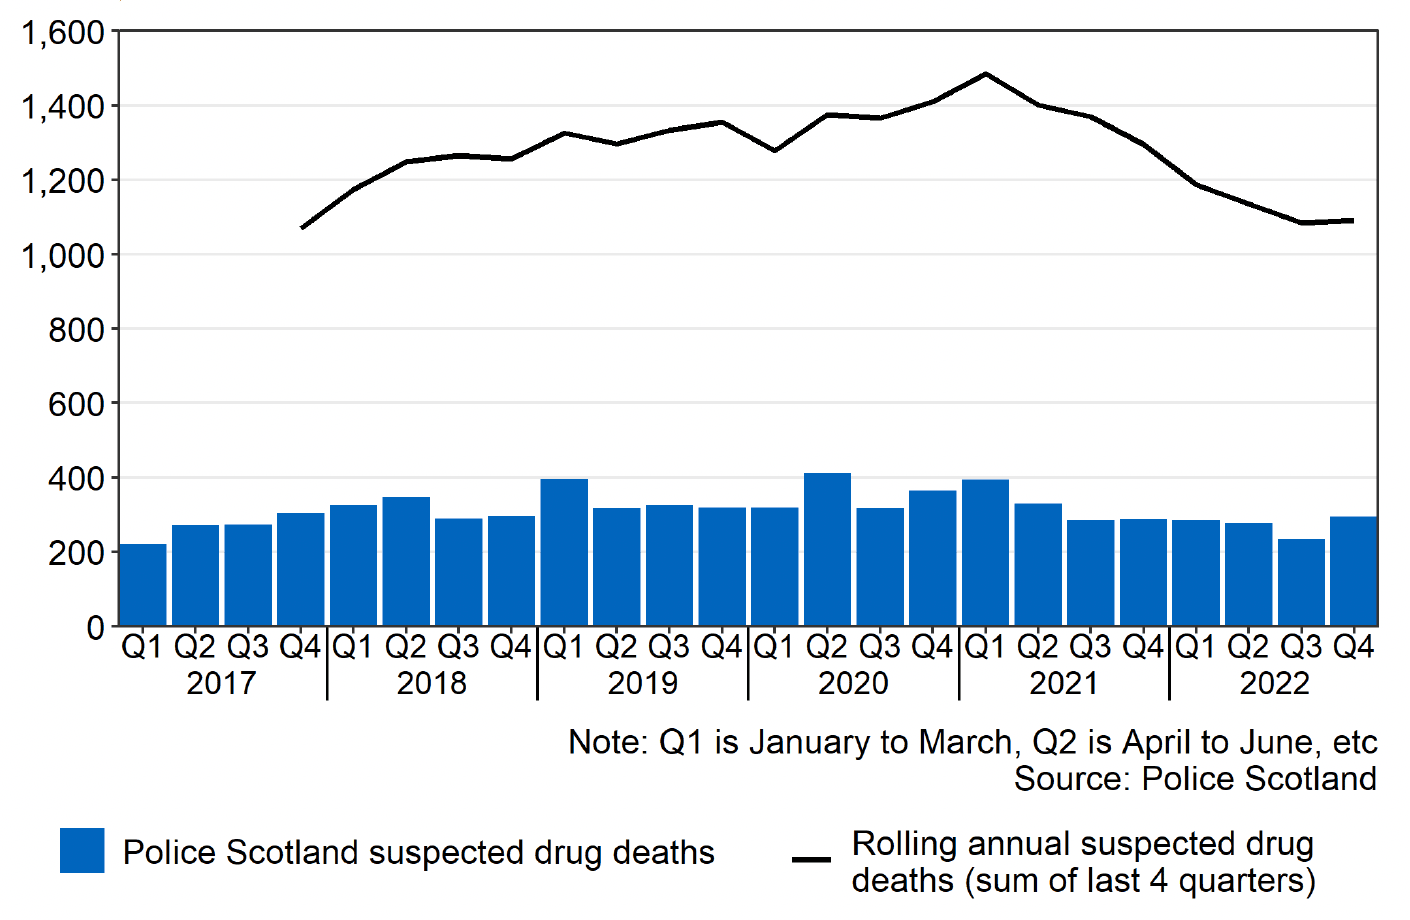 A combined line and bar graph showing the suspected drug death total by quarter, and the summed rolling annual suspected drug death total over the last four quarters, between Q1 2017 and Q4 2022